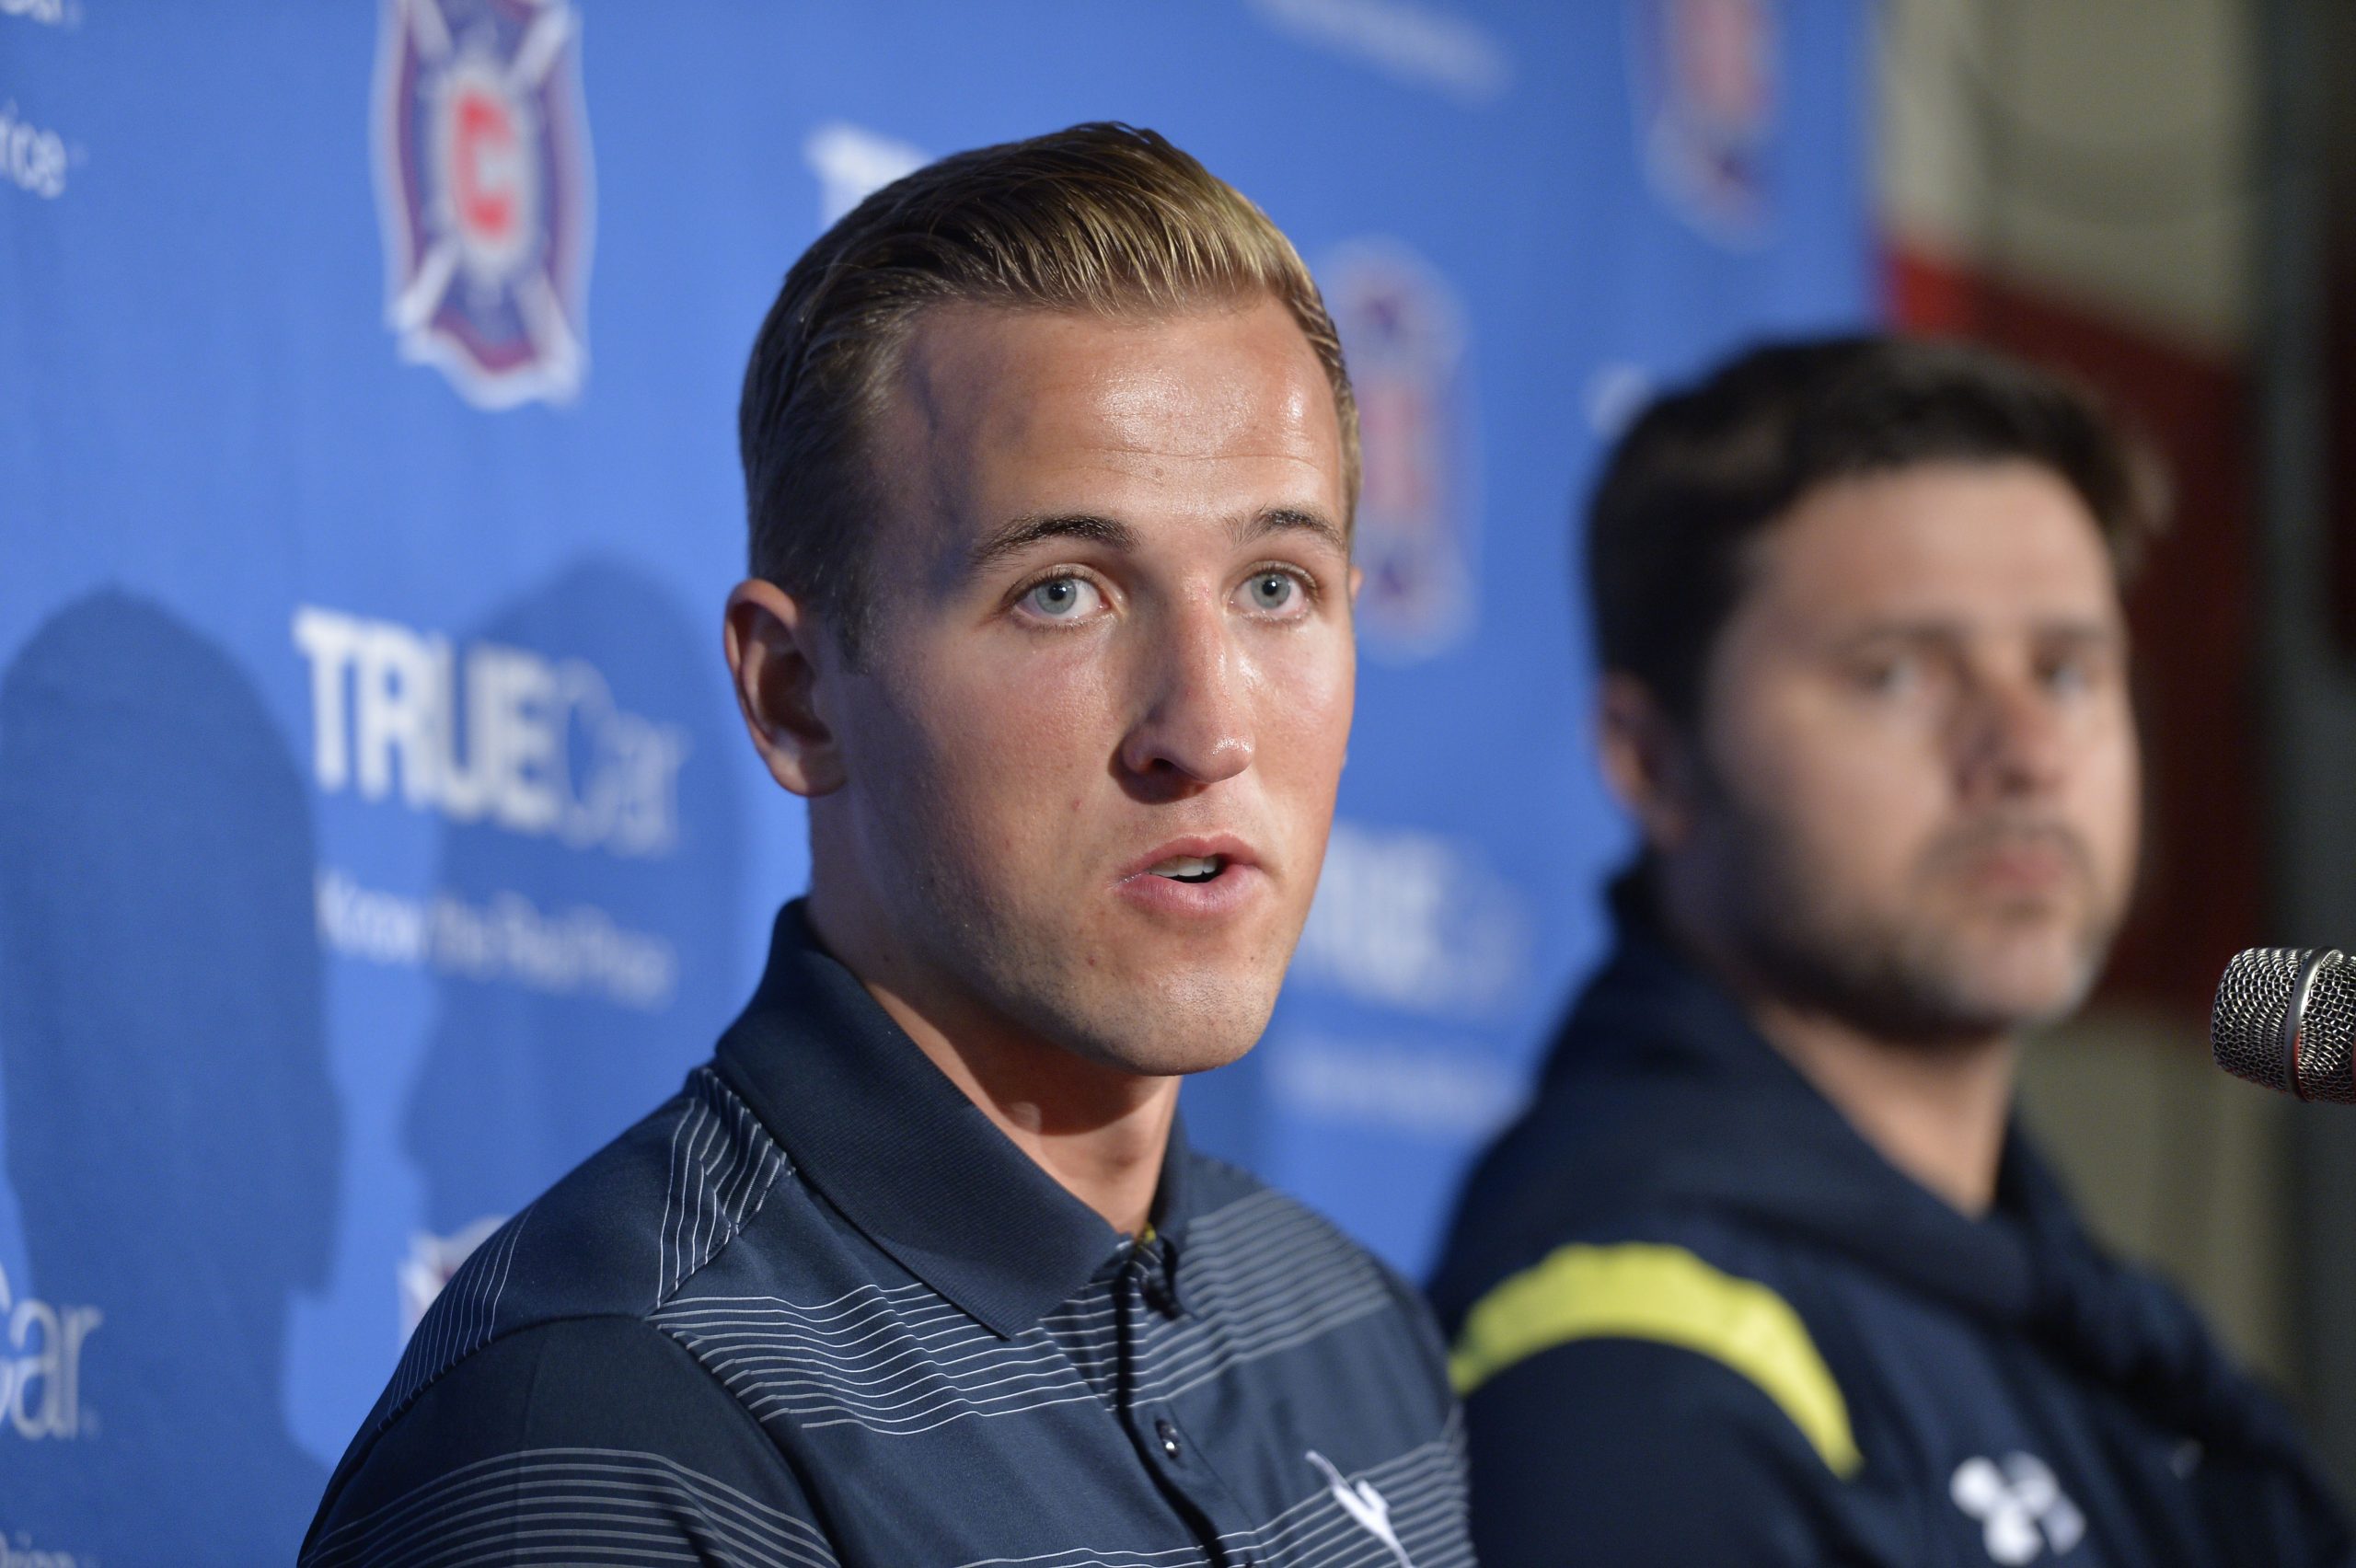 Harry Kane Tottenham Hotspur speaks at a press conference after 2-0 win against MLS side Chicago Fire in 2014.